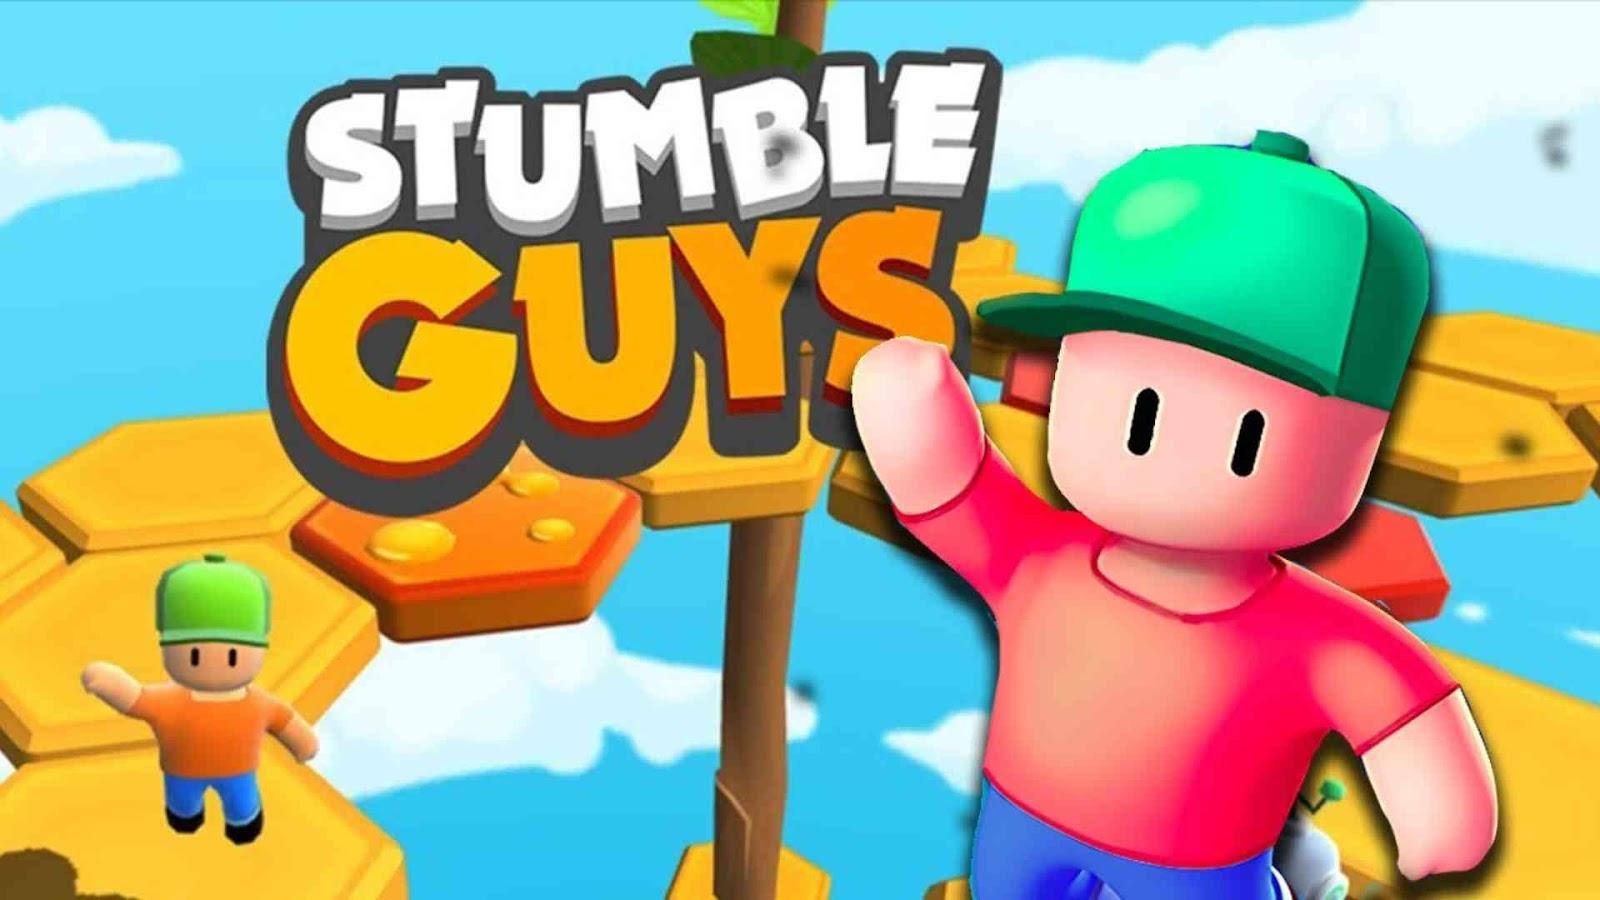 Free-to-play battle royale Stumble Guys will be coming to